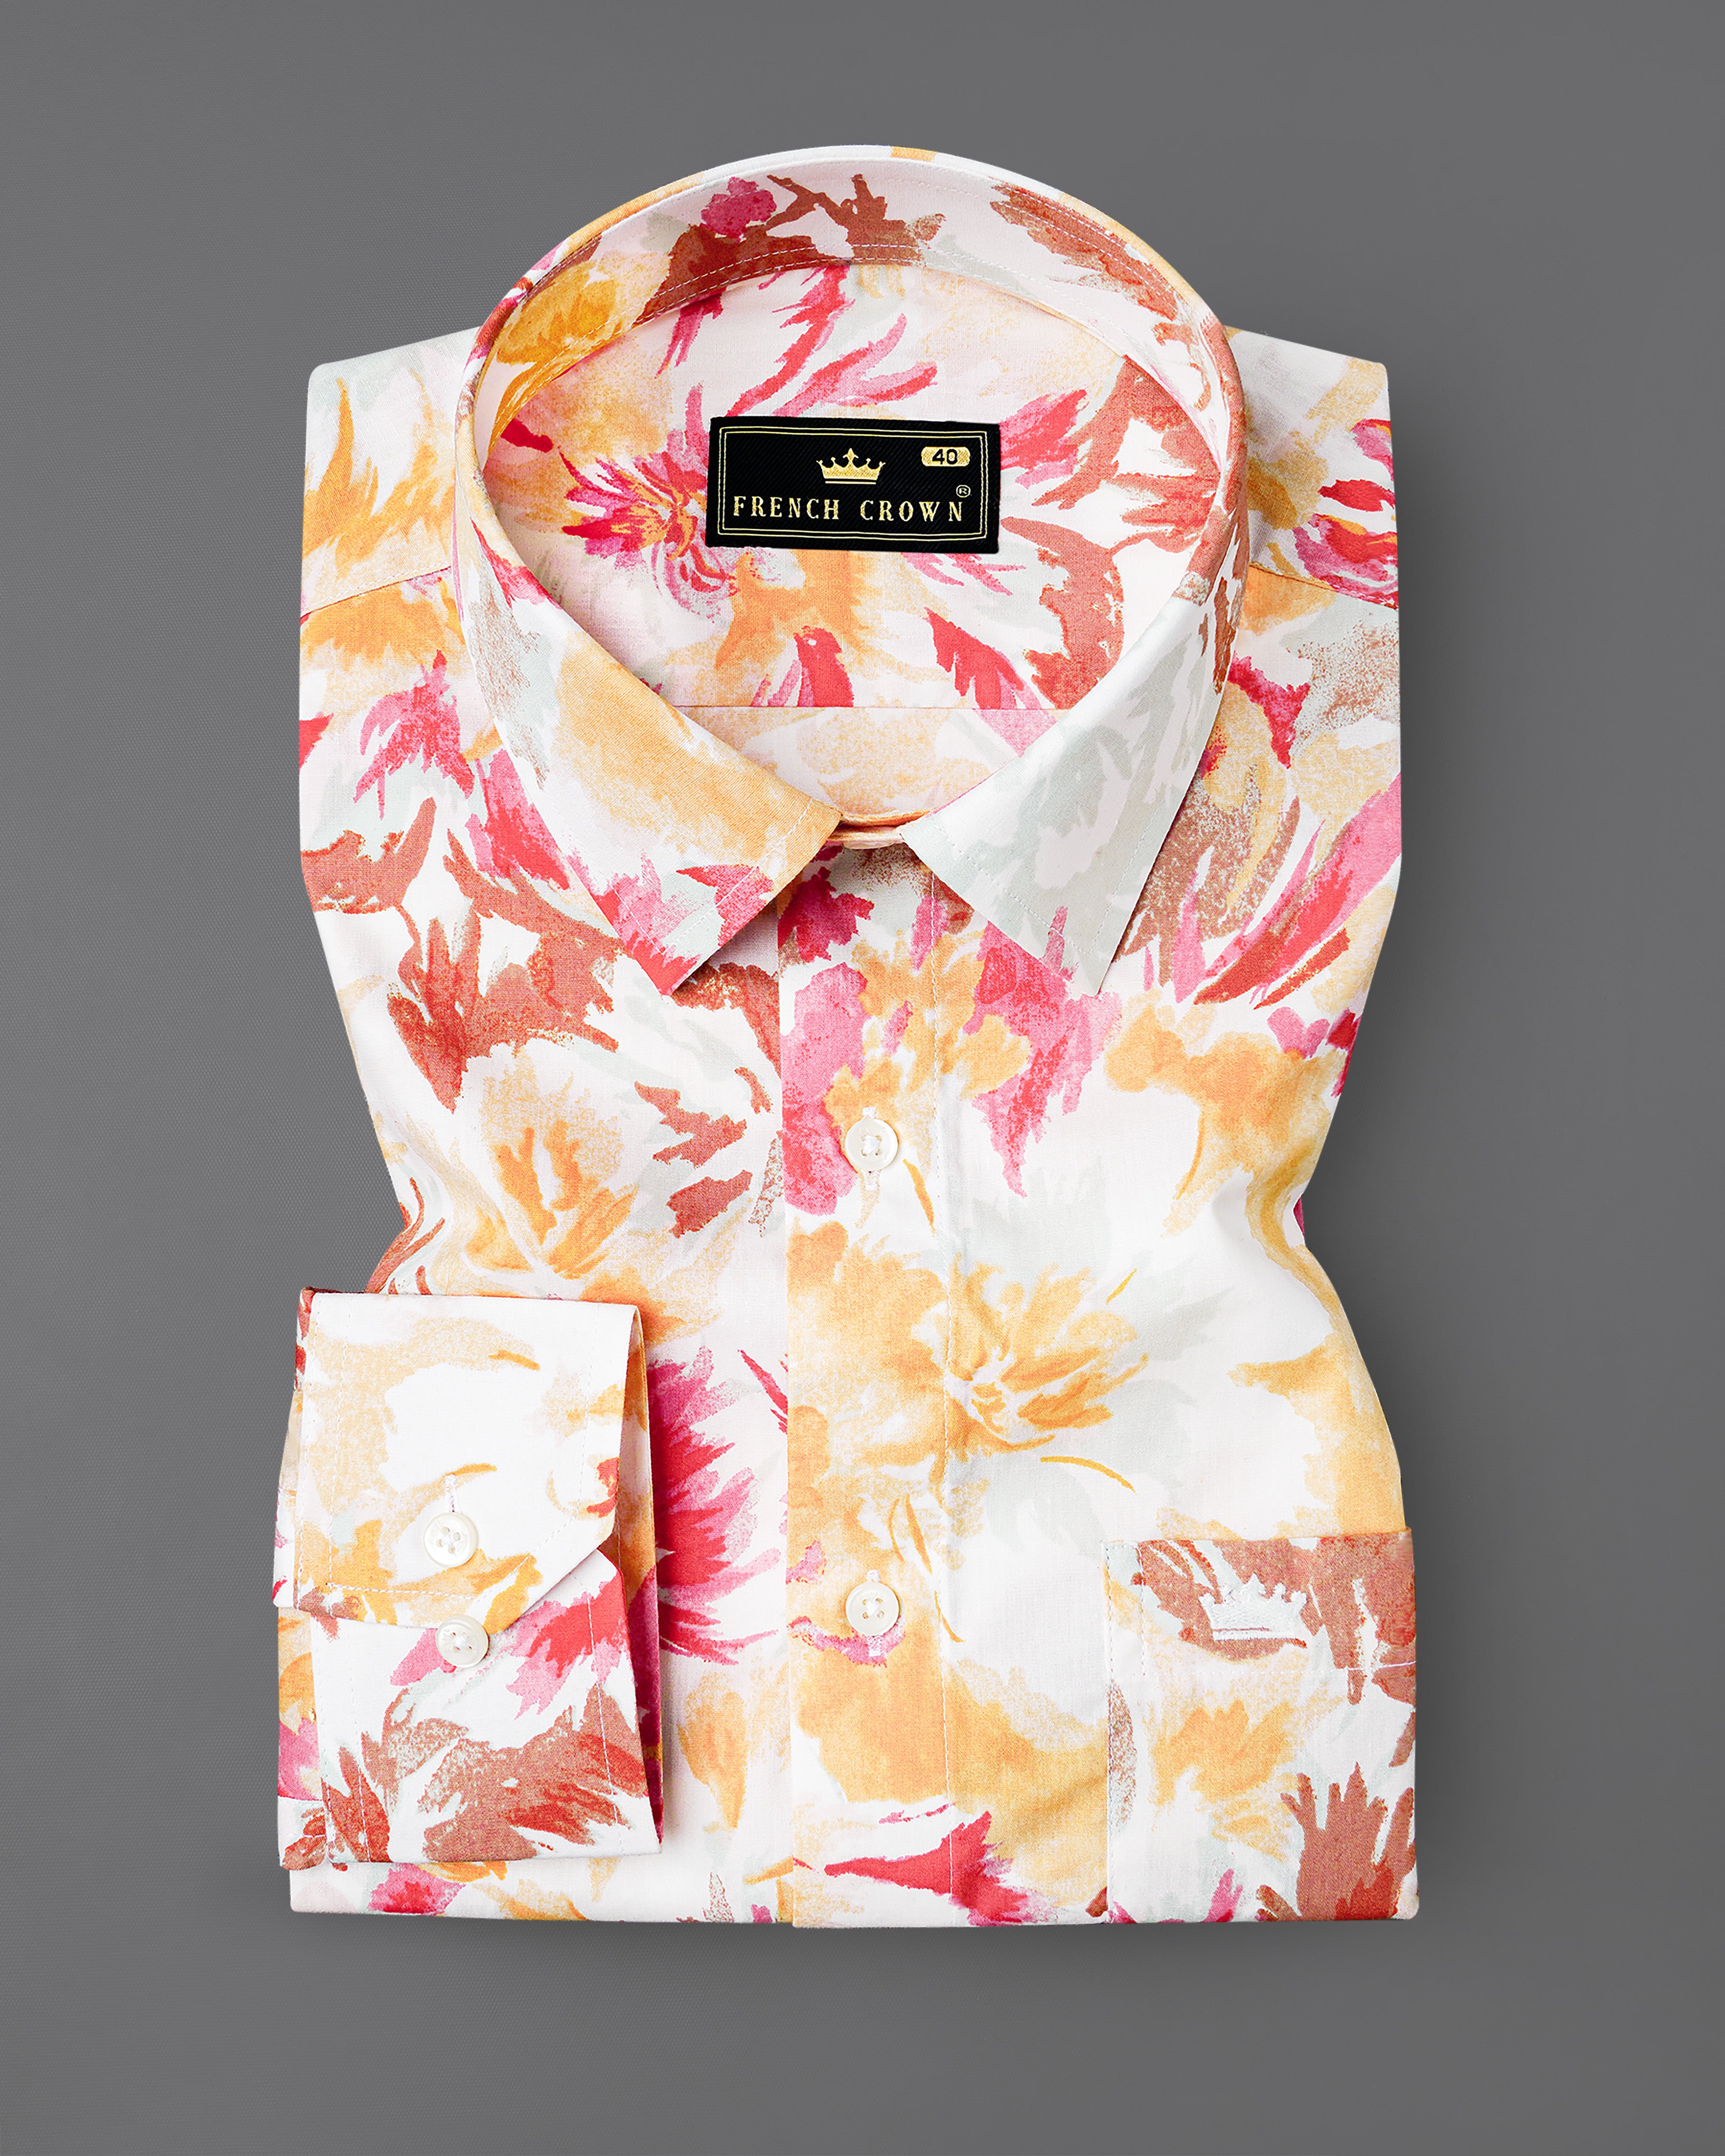 Bright White with Casablanca Yellow and Faded Red Floral Printed Premium Cotton Shirt 8073-38, 8073-H-38, 8073-39, 8073-H-39, 8073-40, 8073-H-40, 8073-42, 8073-H-42, 8073-44, 8073-H-44, 8073-46, 8073-H-46, 8073-48, 8073-H-48, 8073-50, 8073-H-50, 8073-52, 8073-H-52